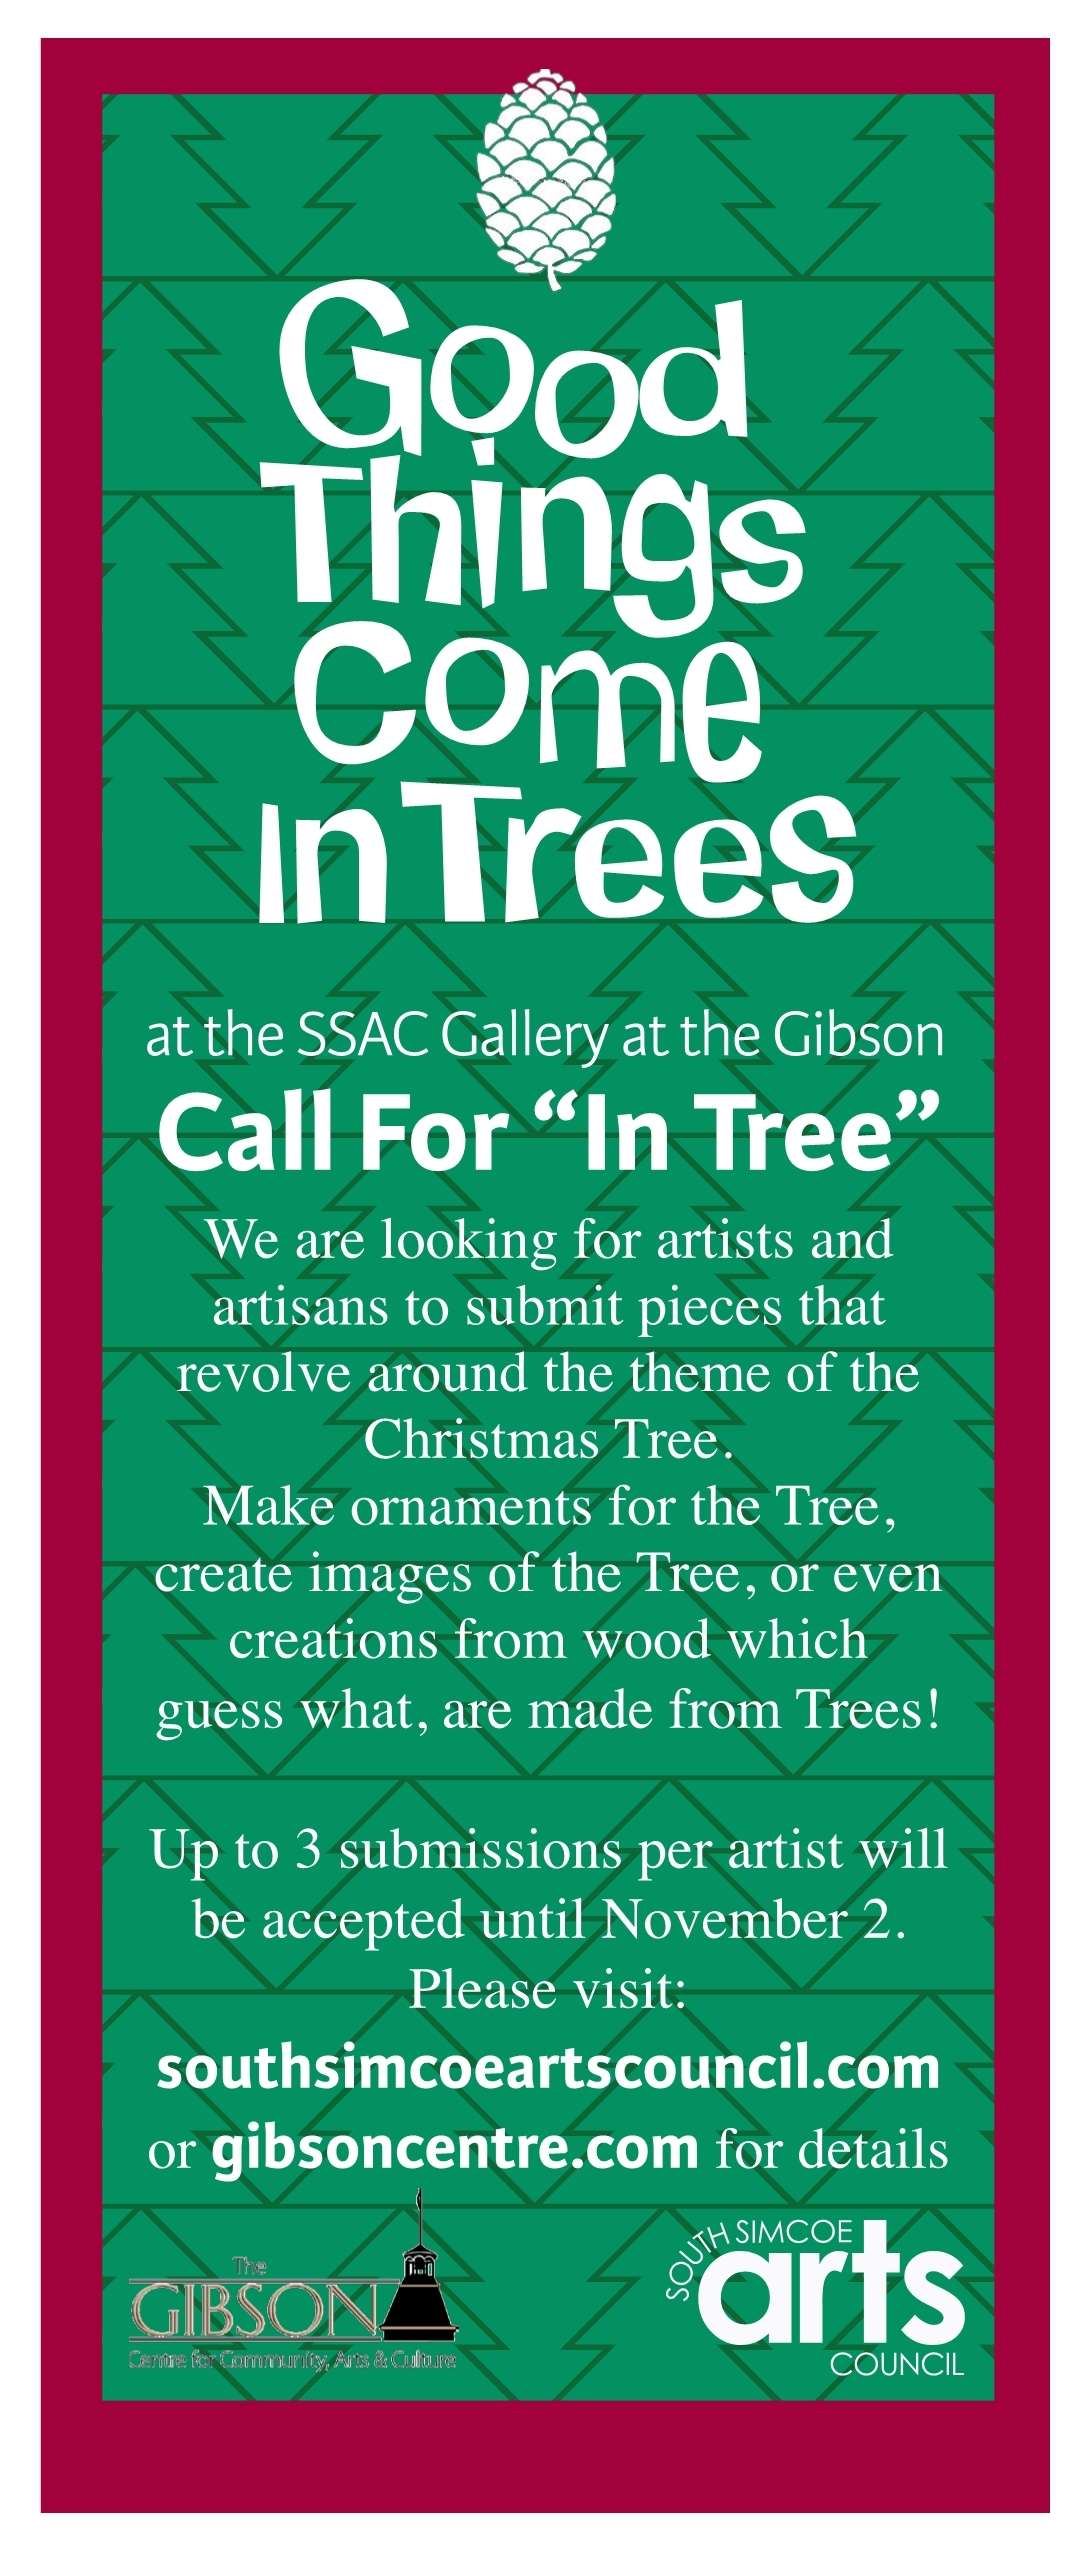 Good Things Come in Trees - Call for Entry